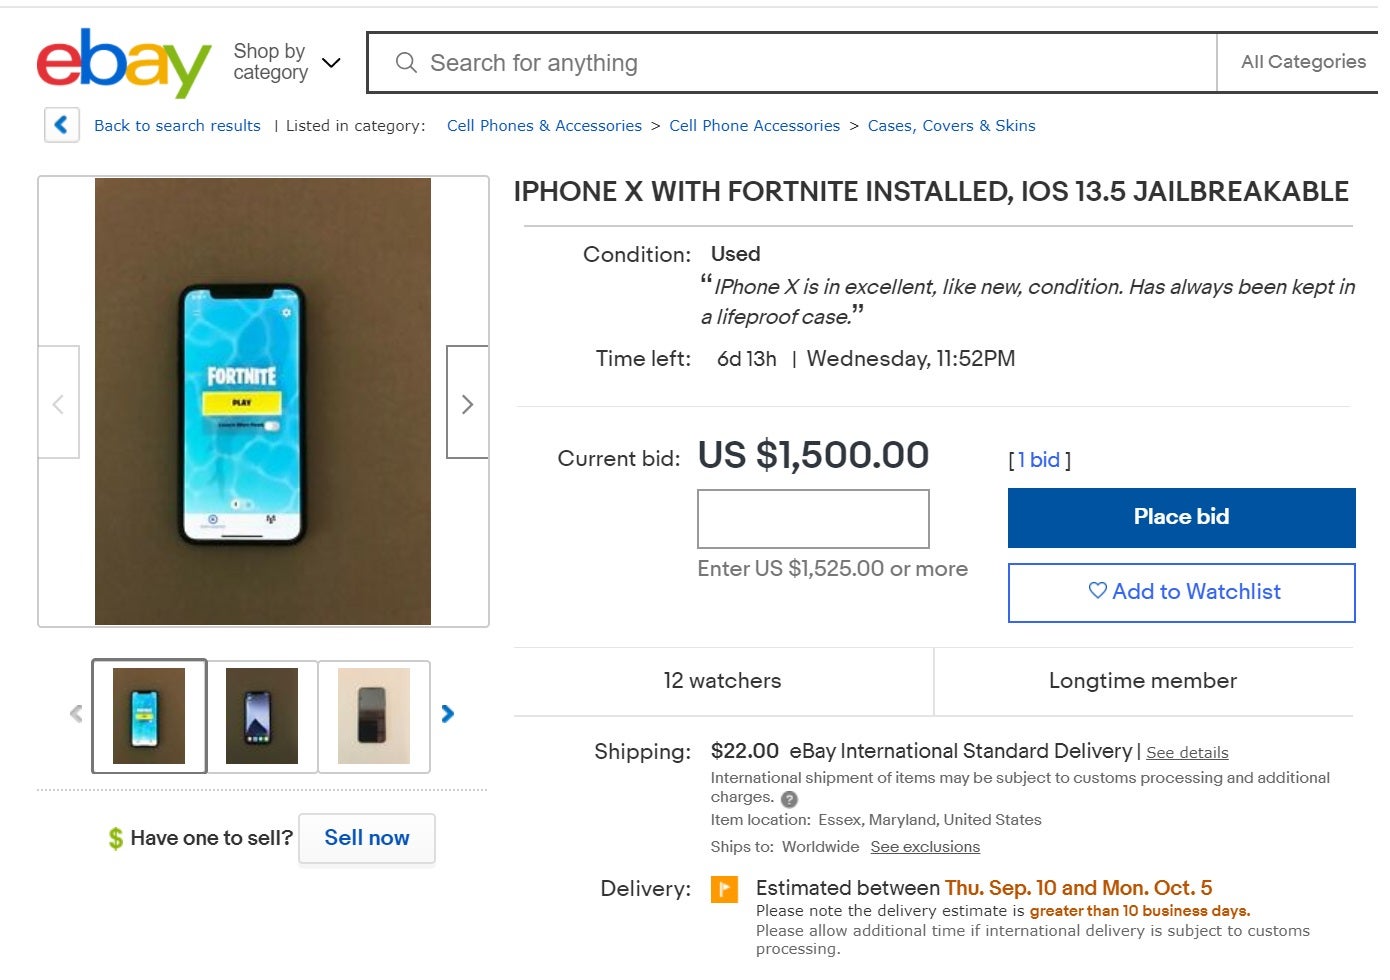 There are dozens of eBay listings for pre-owned iPhones with Fortnite installed